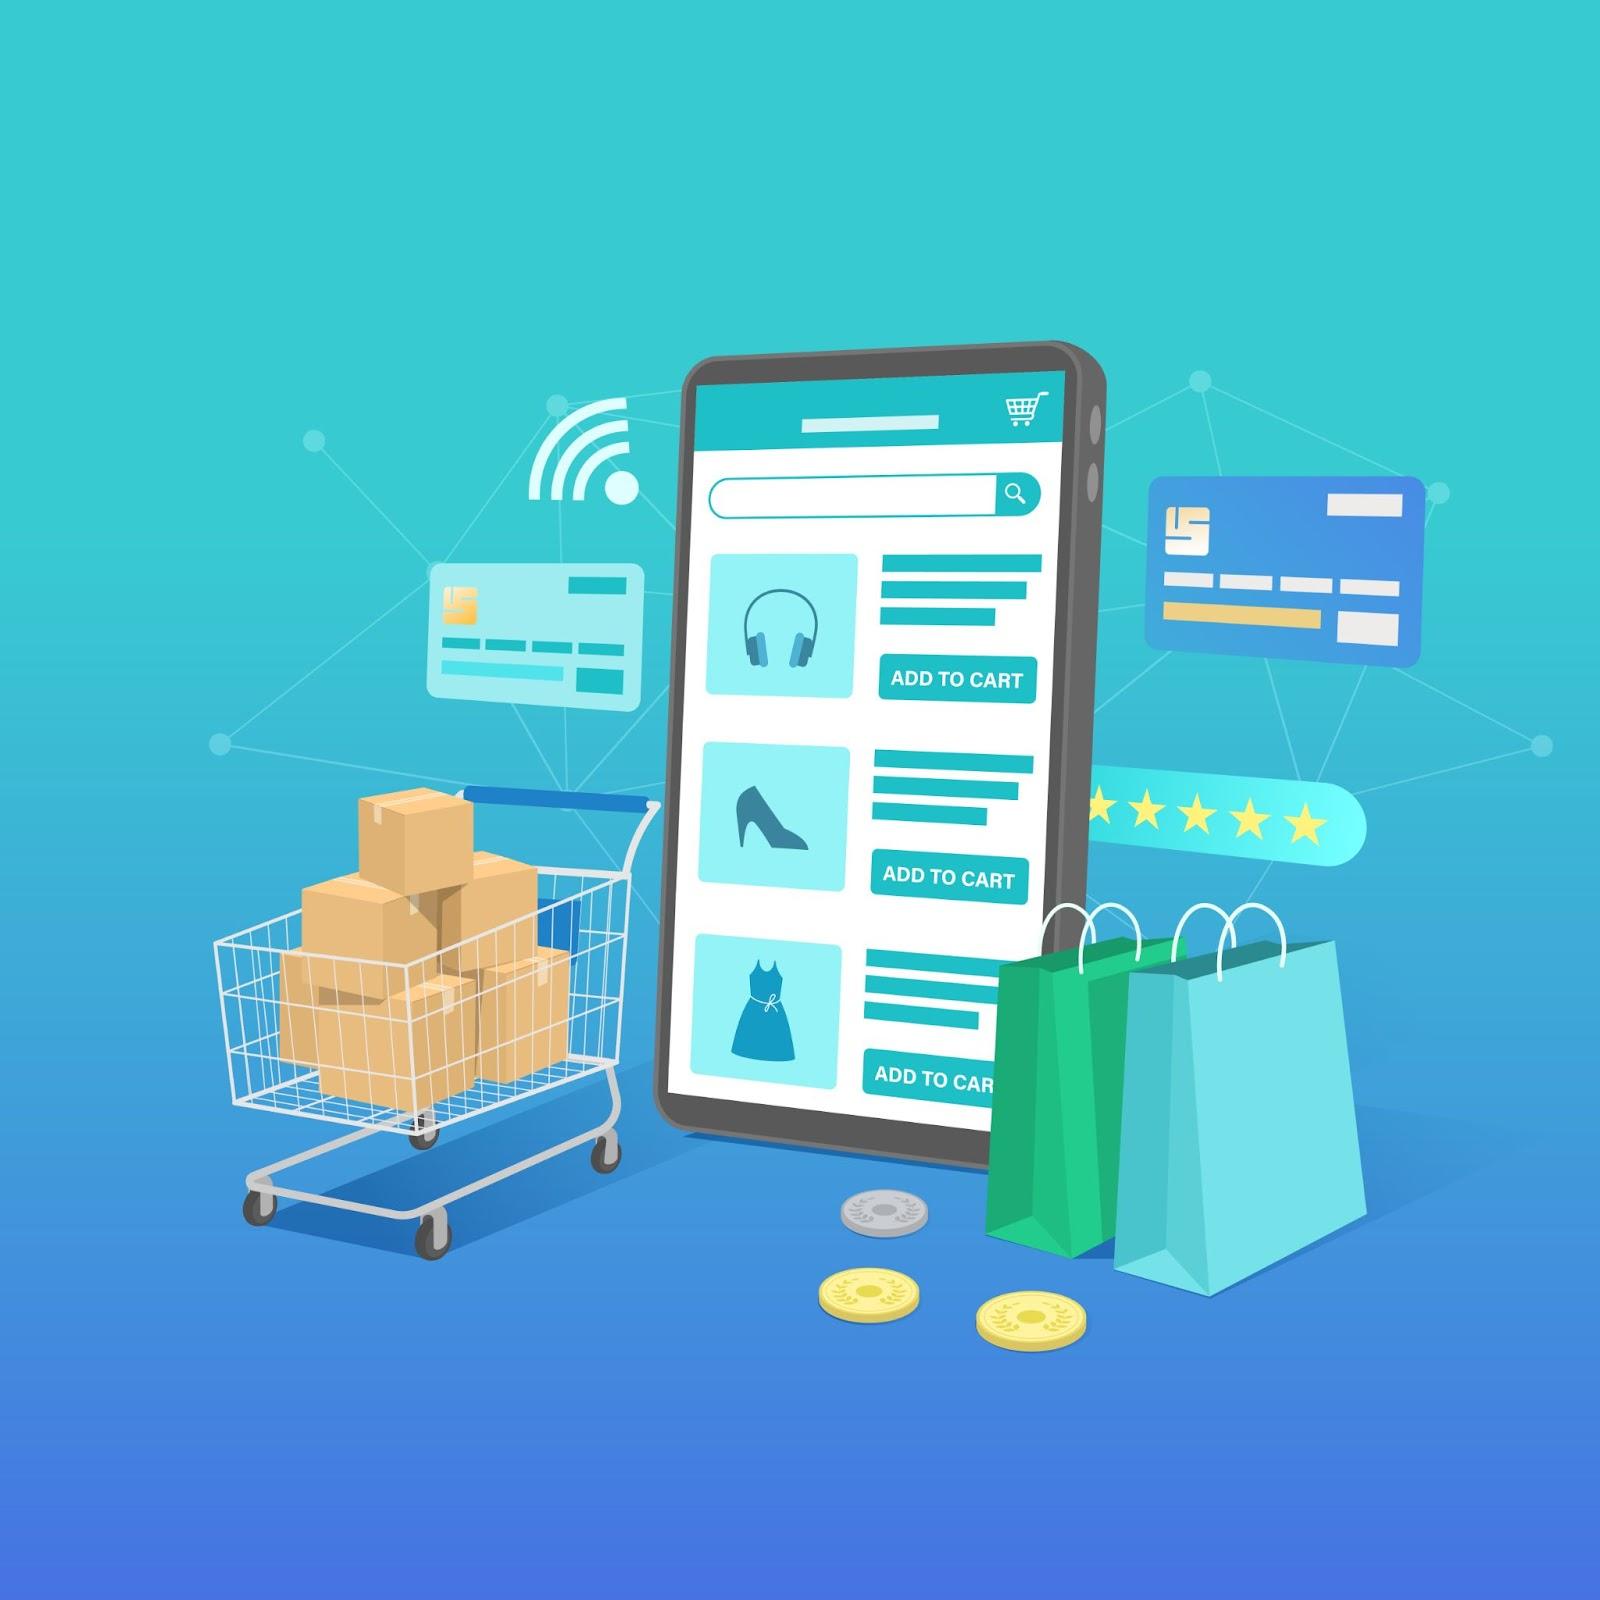 Top 7 Ecommerce Trends in 2022 to fuel your ecommerce growth